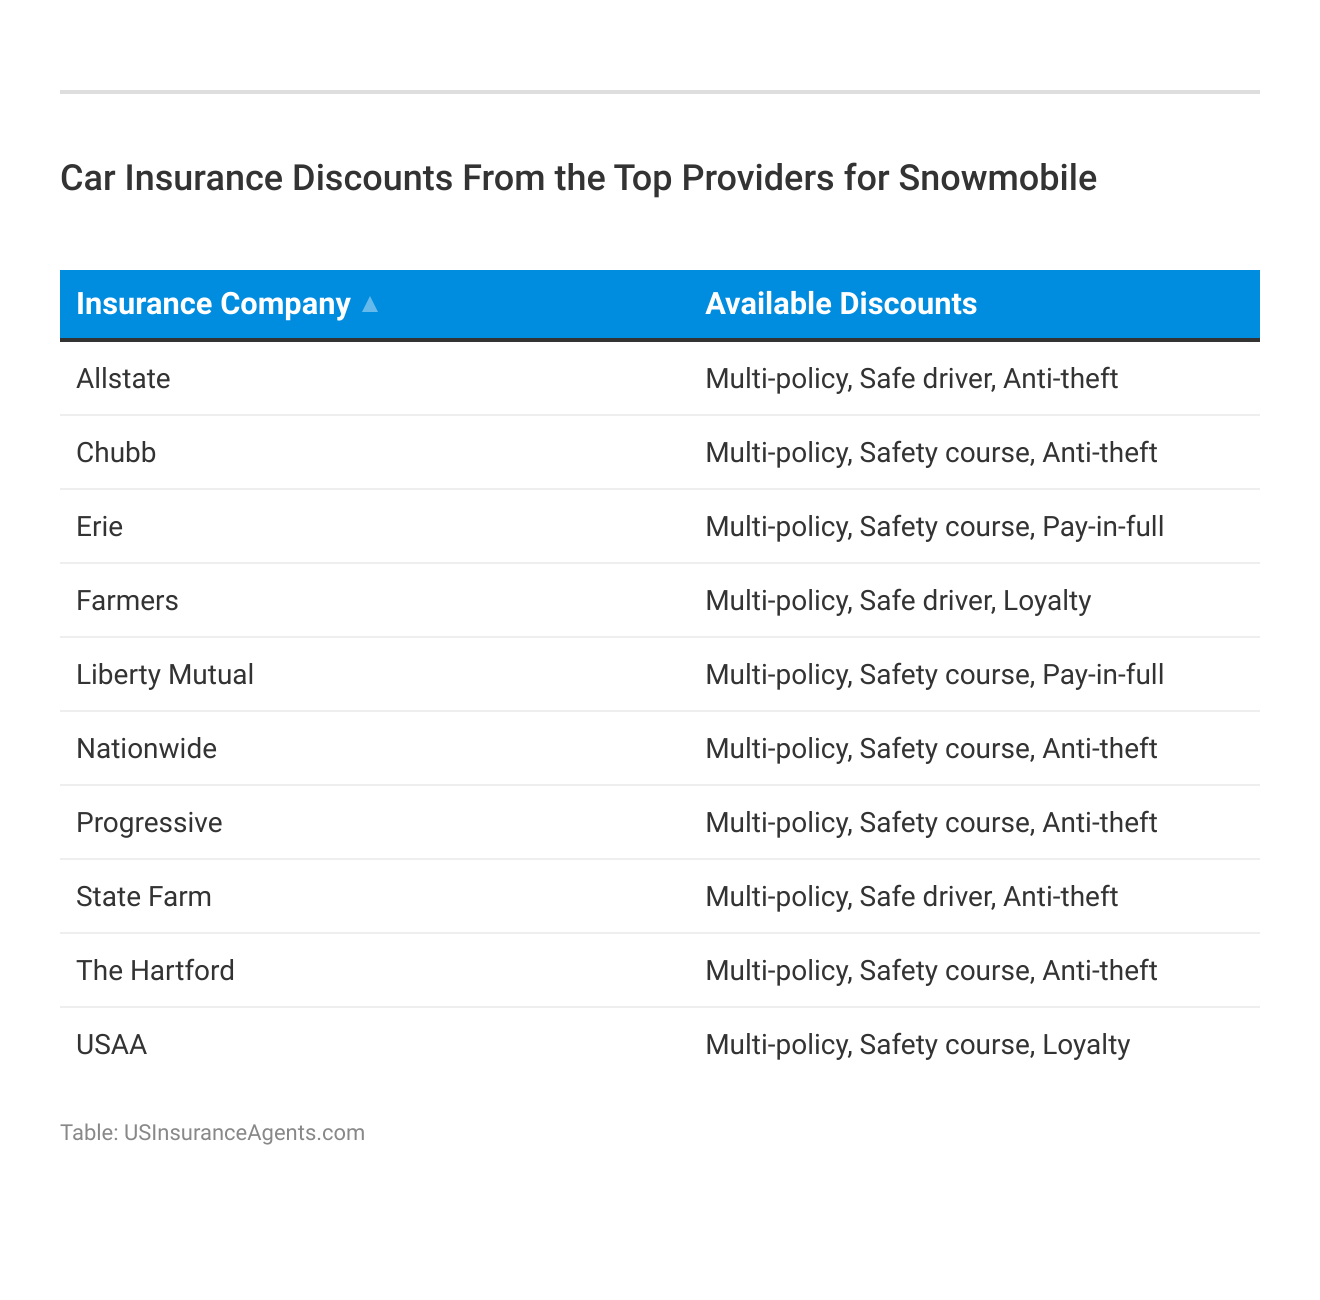 <h3>Car Insurance Discounts From the Top Providers for Snowmobile </h3>